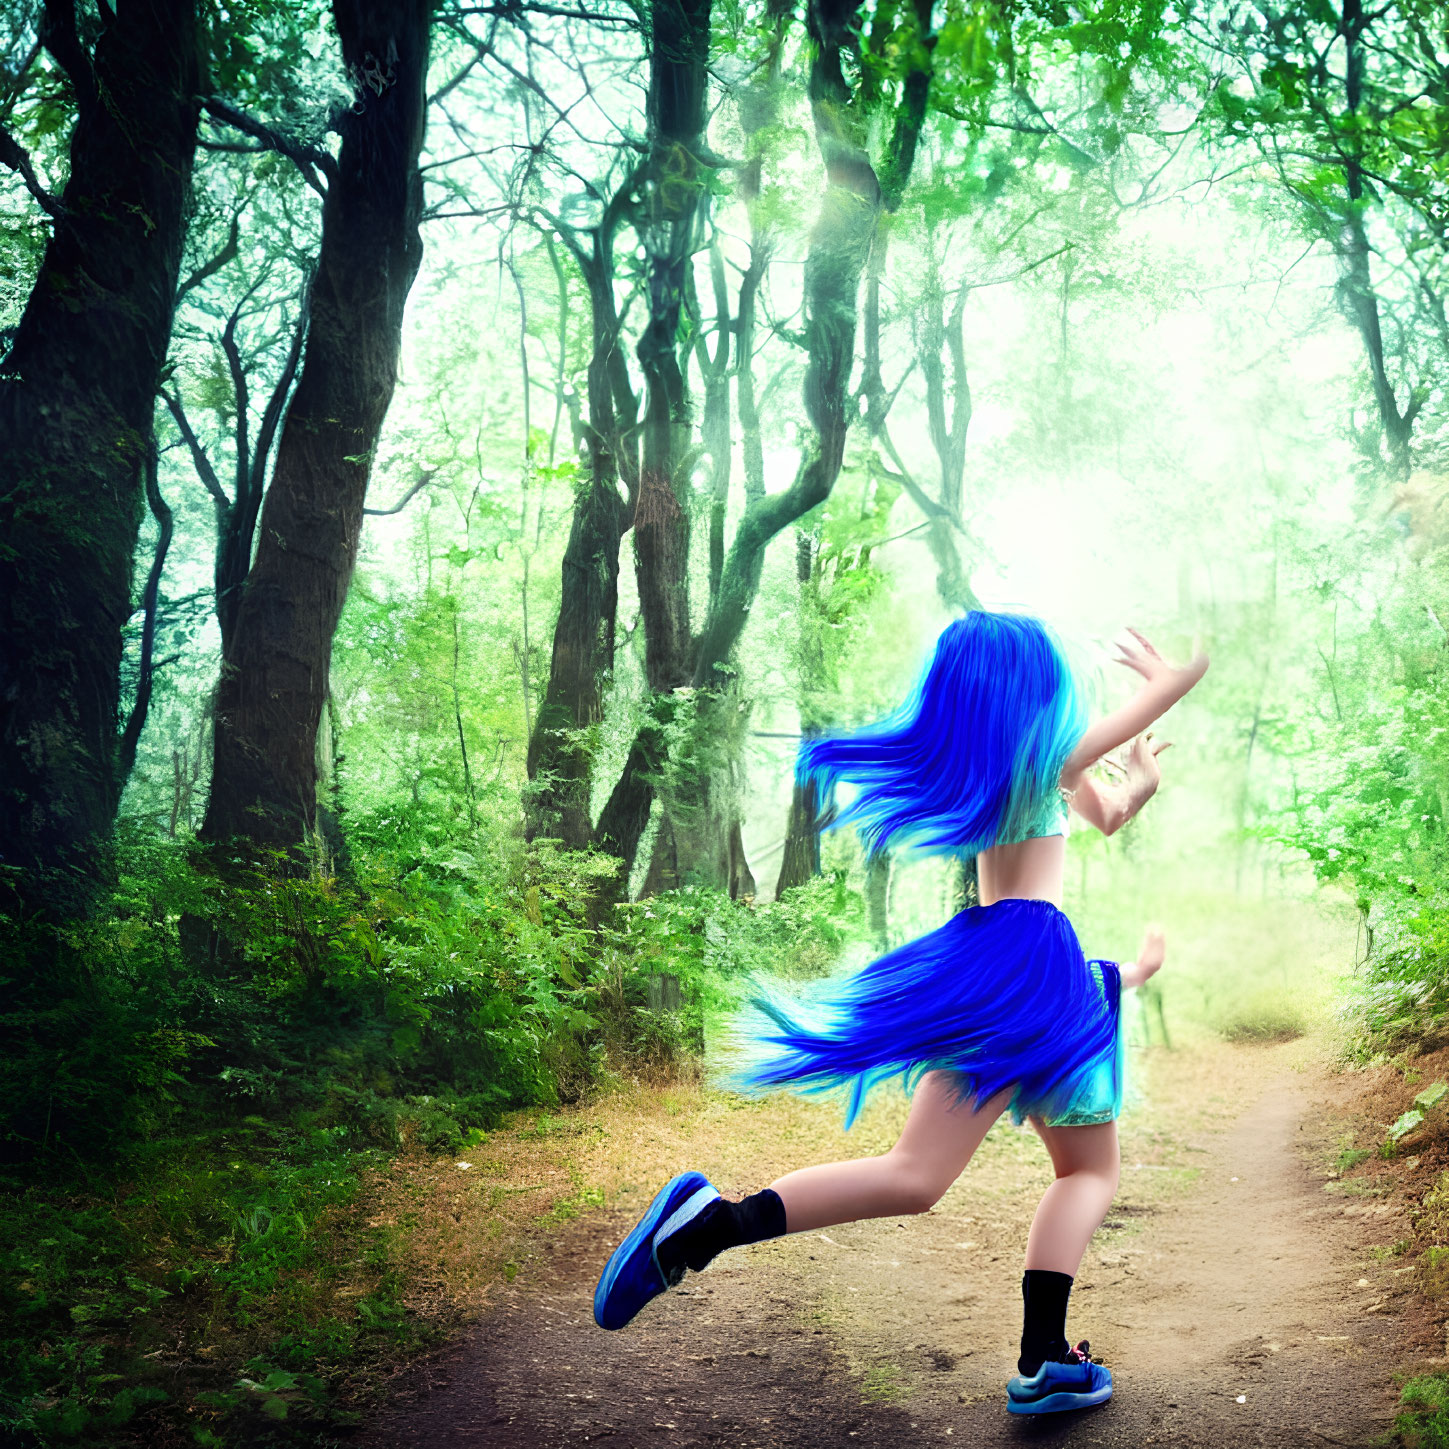 Vibrant blue-haired person running in misty forest trail